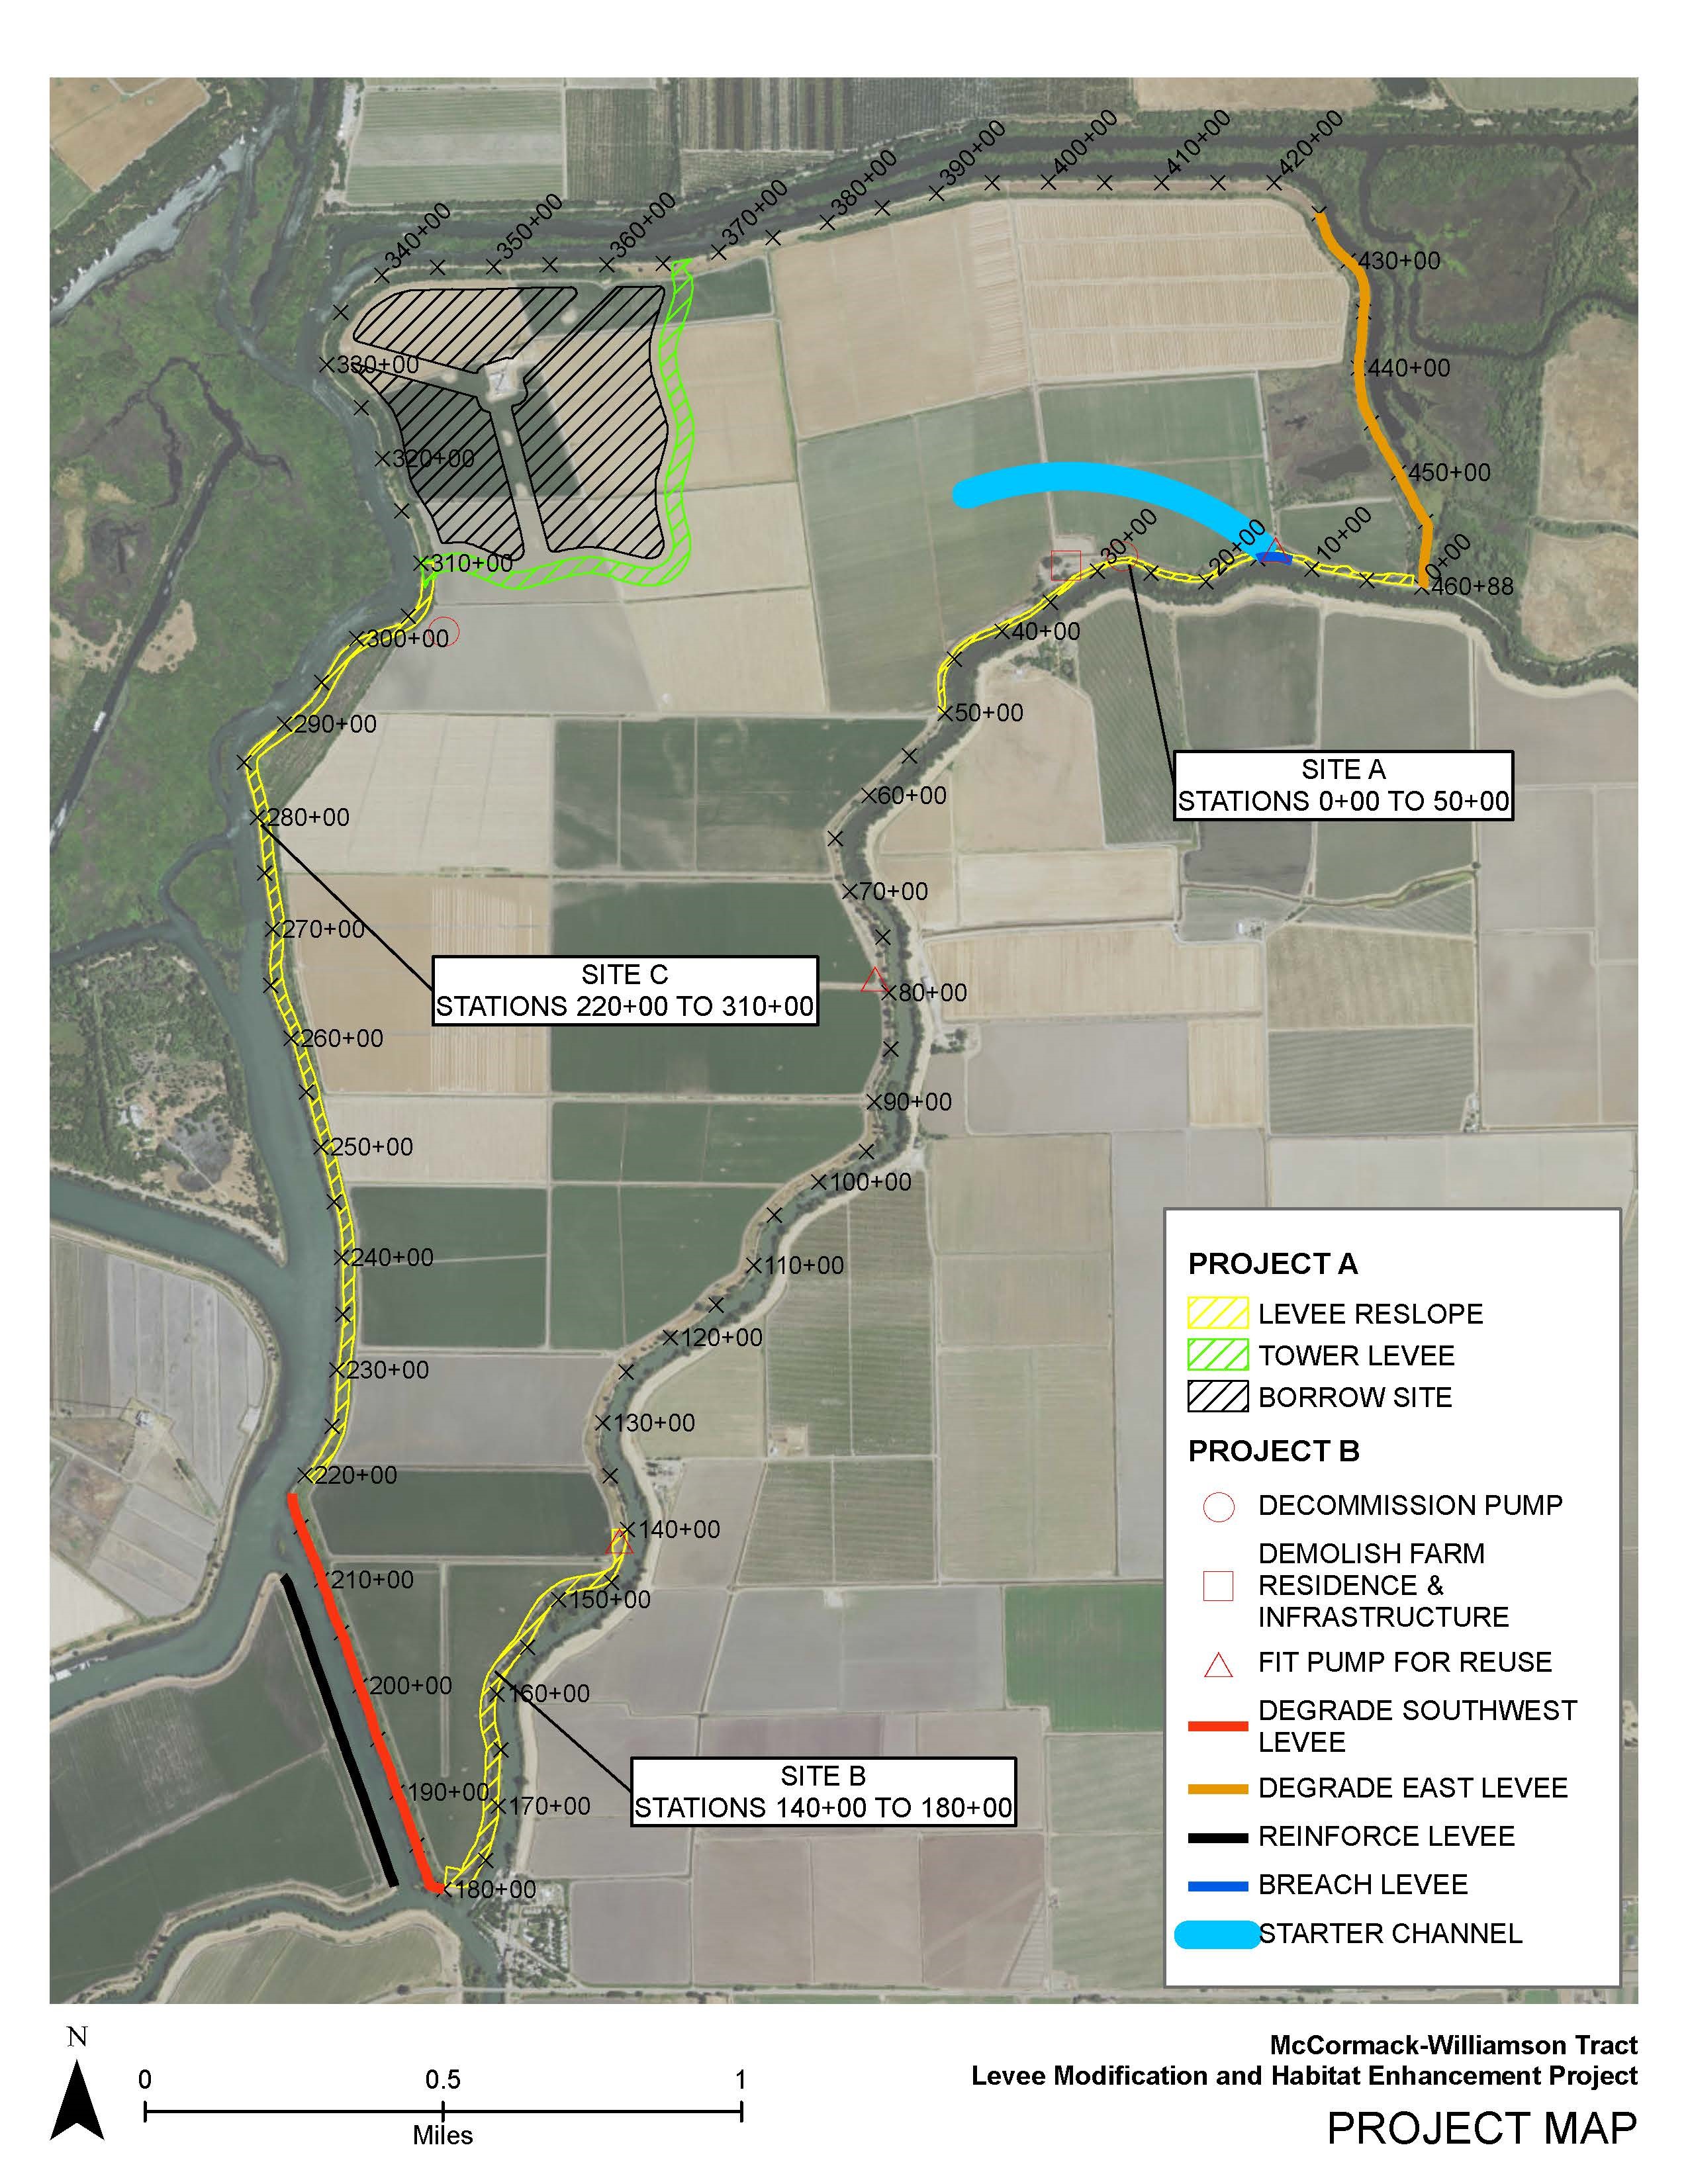 Map showing the project details about the McCormack-Williamson Tract Levee Modification and Habitat Enhancement Project near Walnut Grove, California. For more information, contact the program manager, Anitra Pawley, by email at anitra.pawley@water.ca.gov.